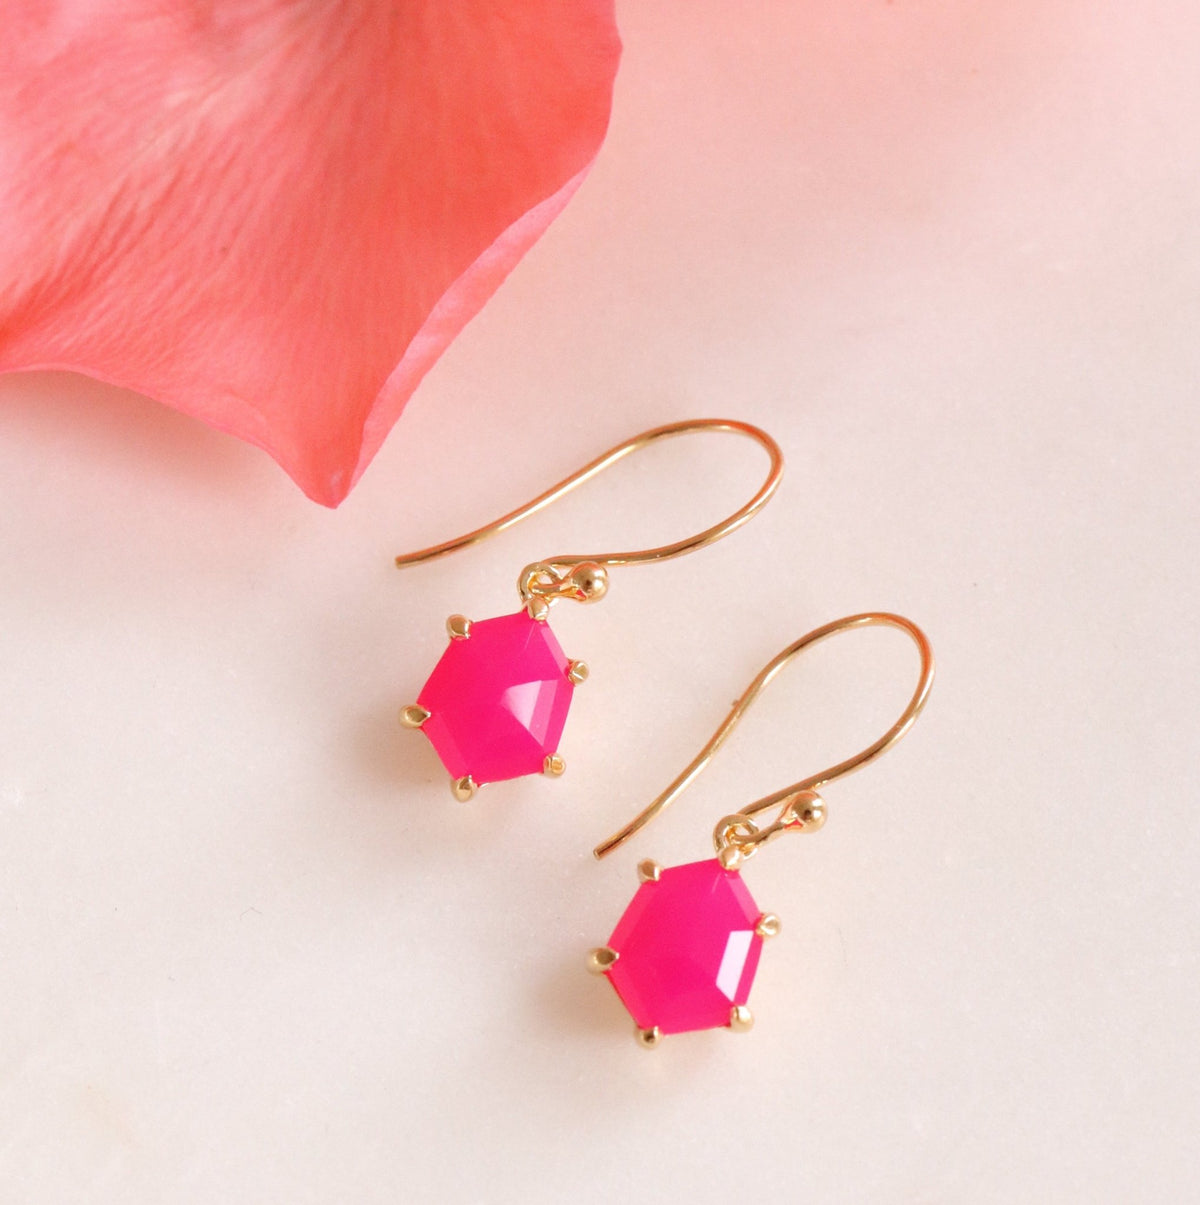 MINI HONOUR DROP EARRINGS - HOT PINK CHALCEDONY &amp; GOLD - SO PRETTY CARA COTTER